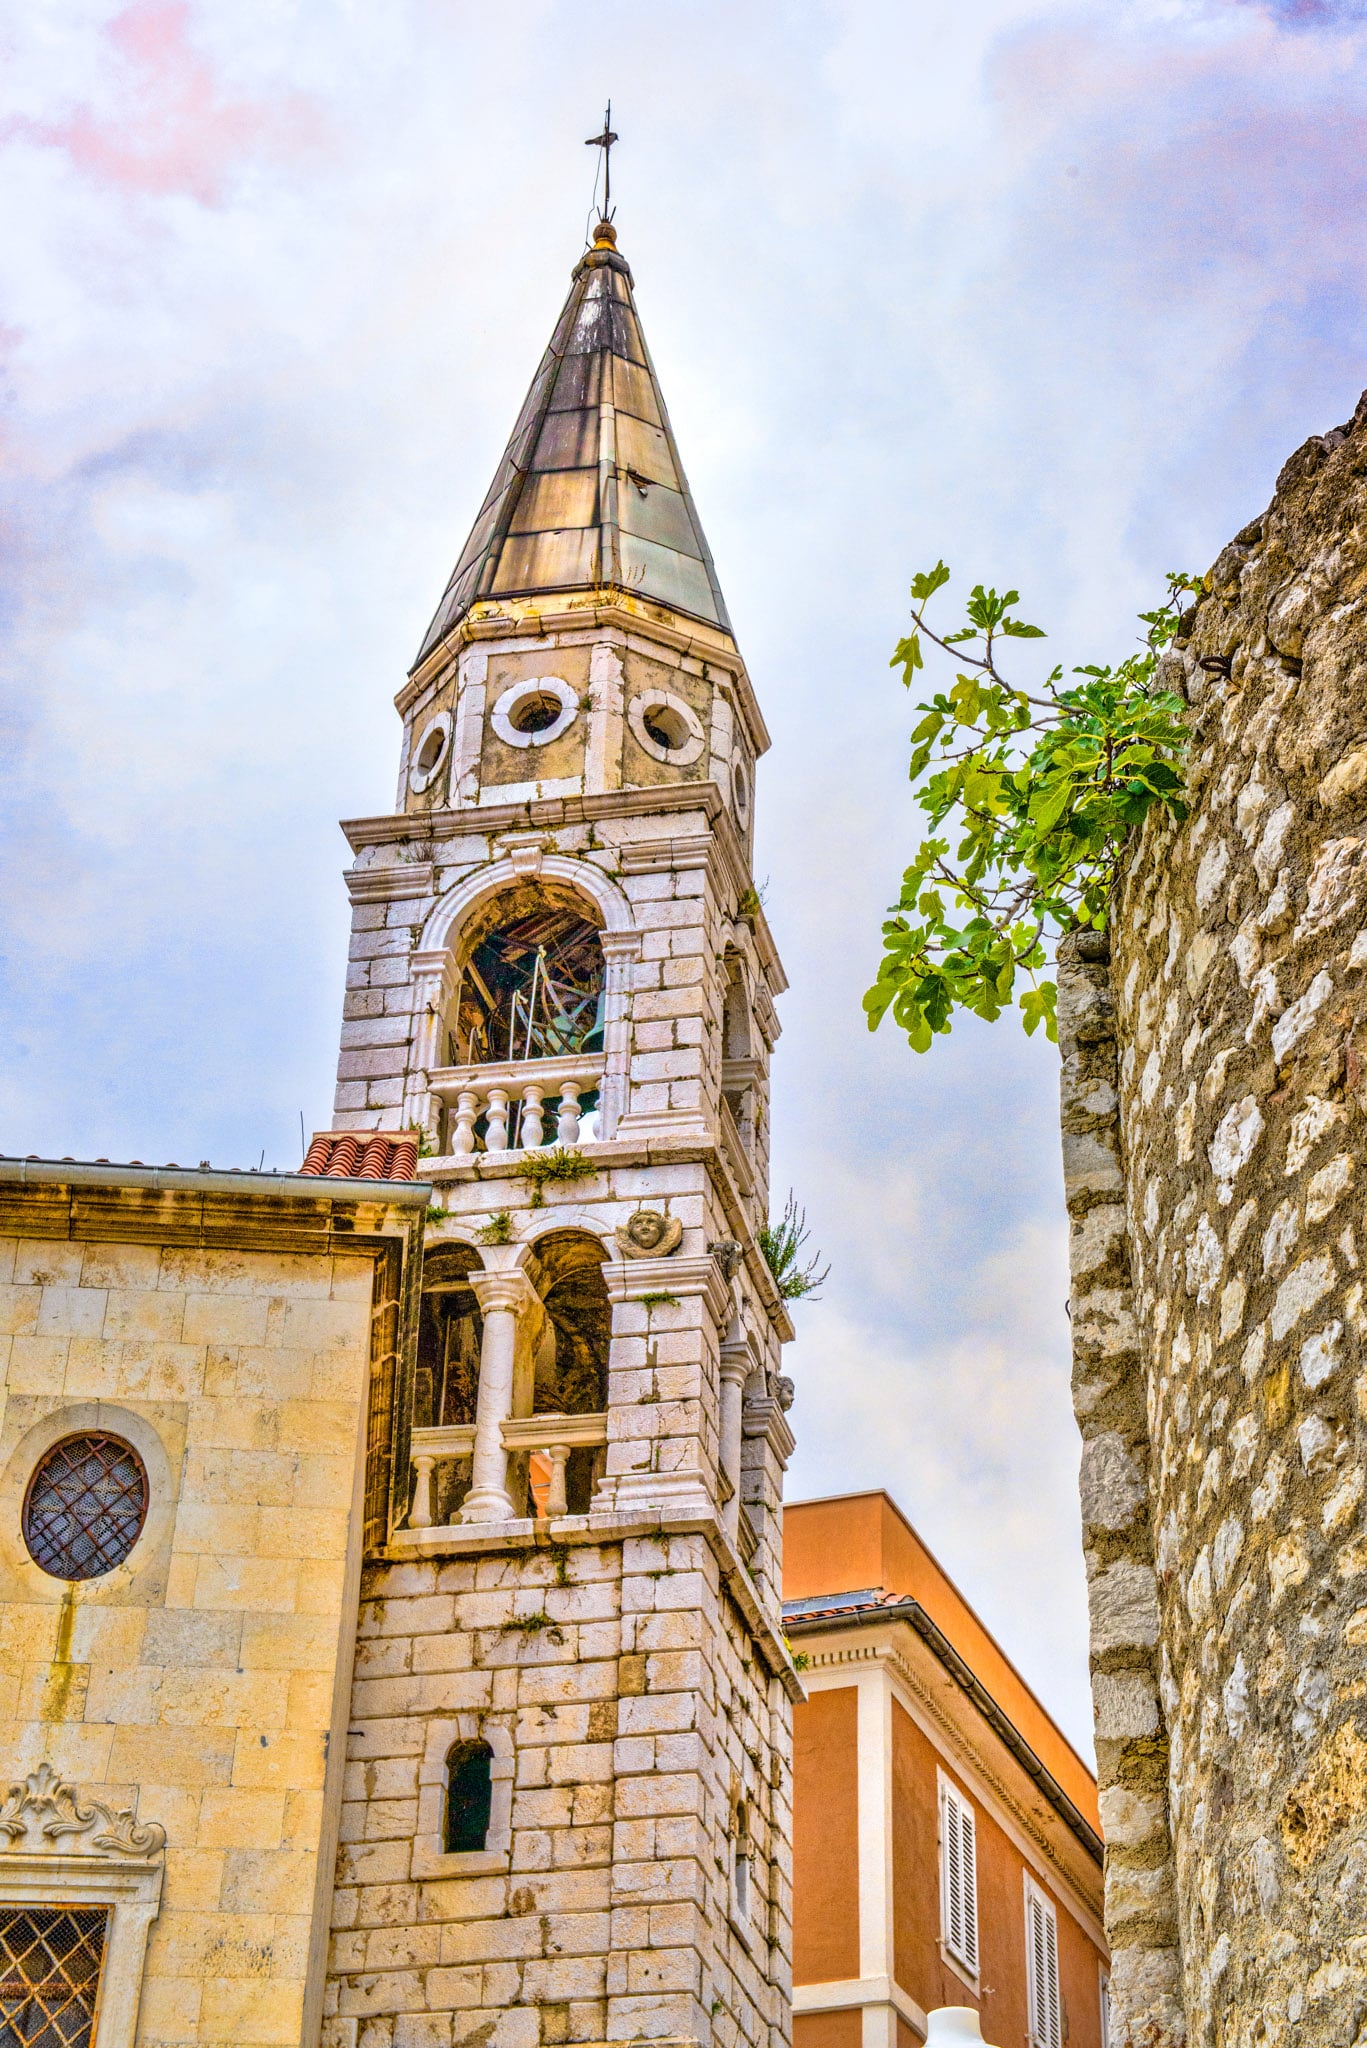 A view looking up at the bell tower of the Church of St. Elijah the Prophet in Zadar, Croatia.